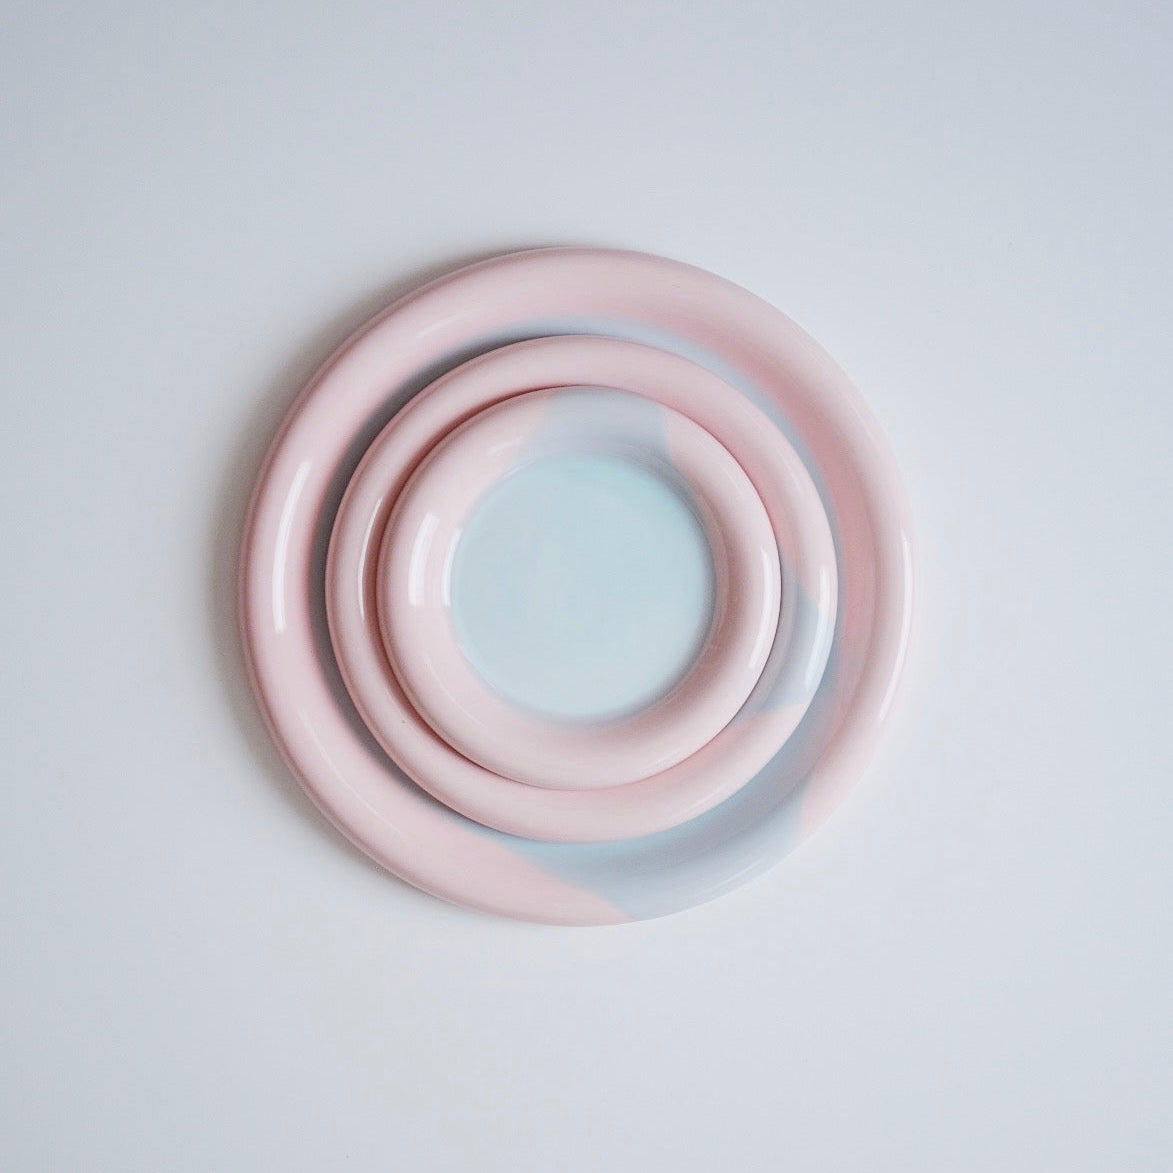 Ring Plate - Pink/Sky